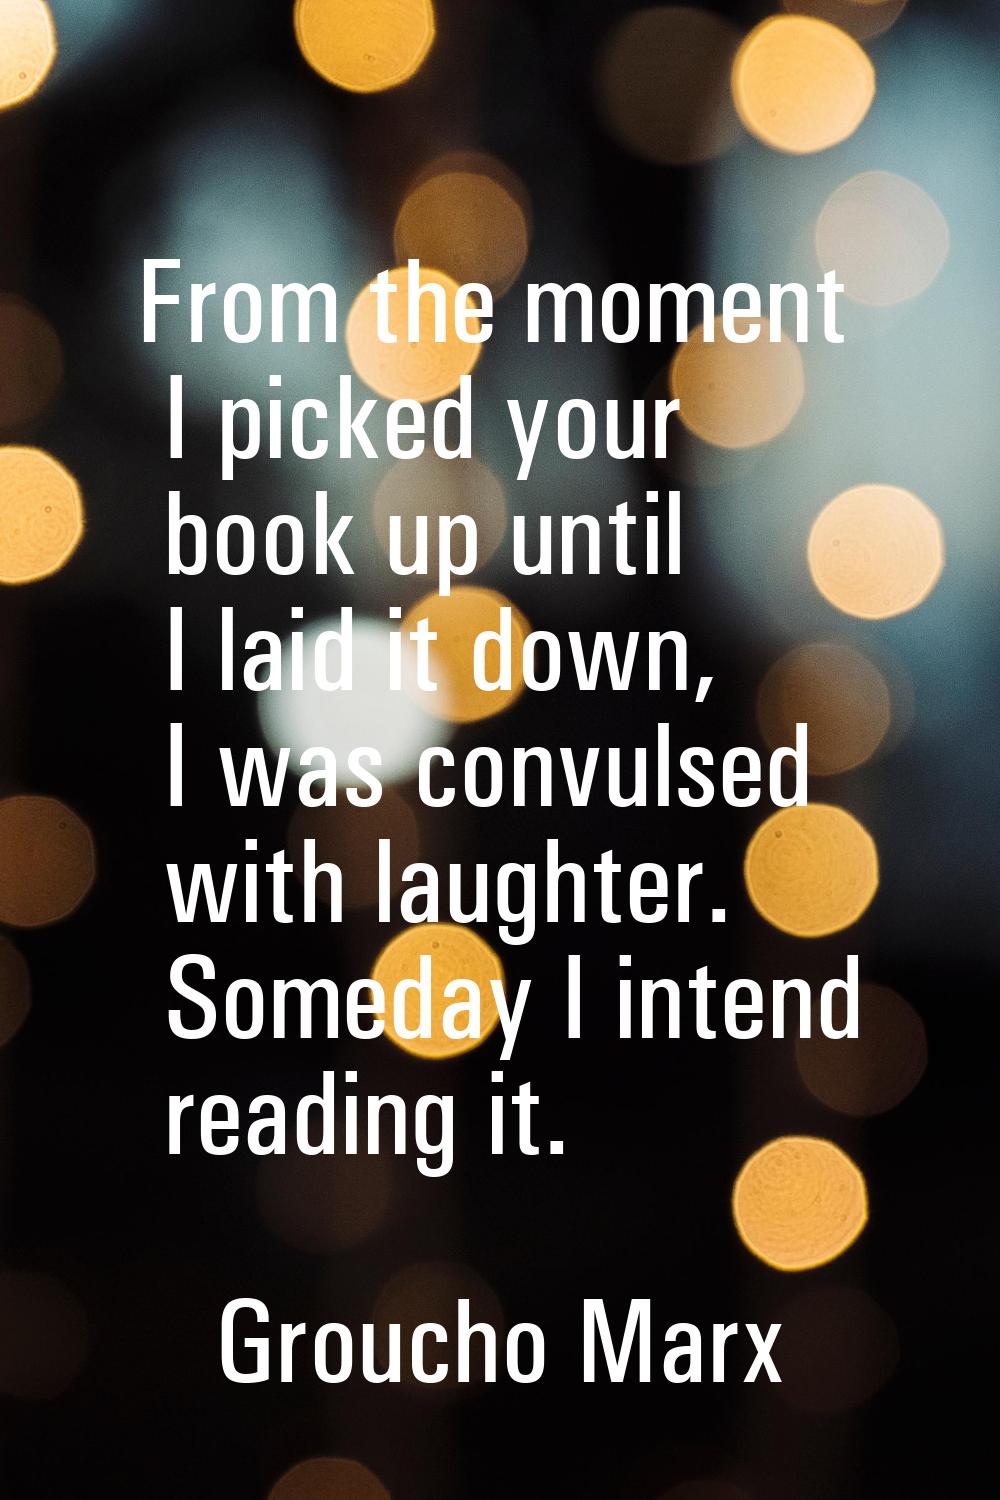 From the moment I picked your book up until I laid it down, I was convulsed with laughter. Someday 